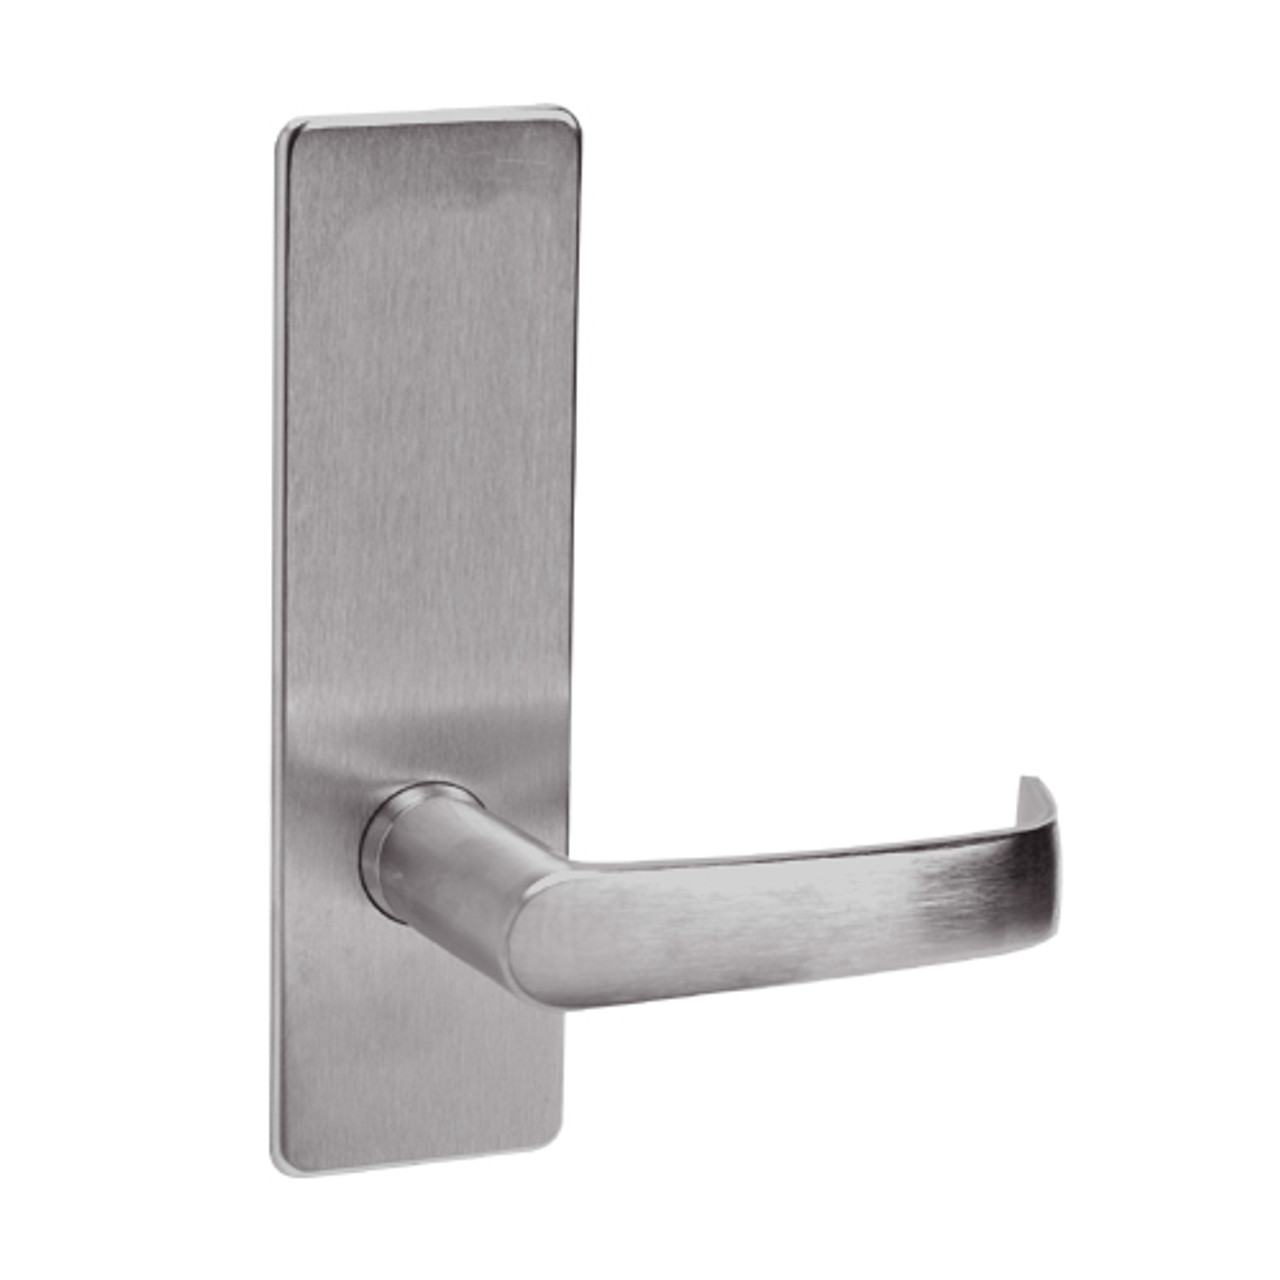 ML2020-NSR-630-M31 Corbin Russwin ML2000 Series Mortise Privacy Locksets with Newport Lever in Satin Stainless